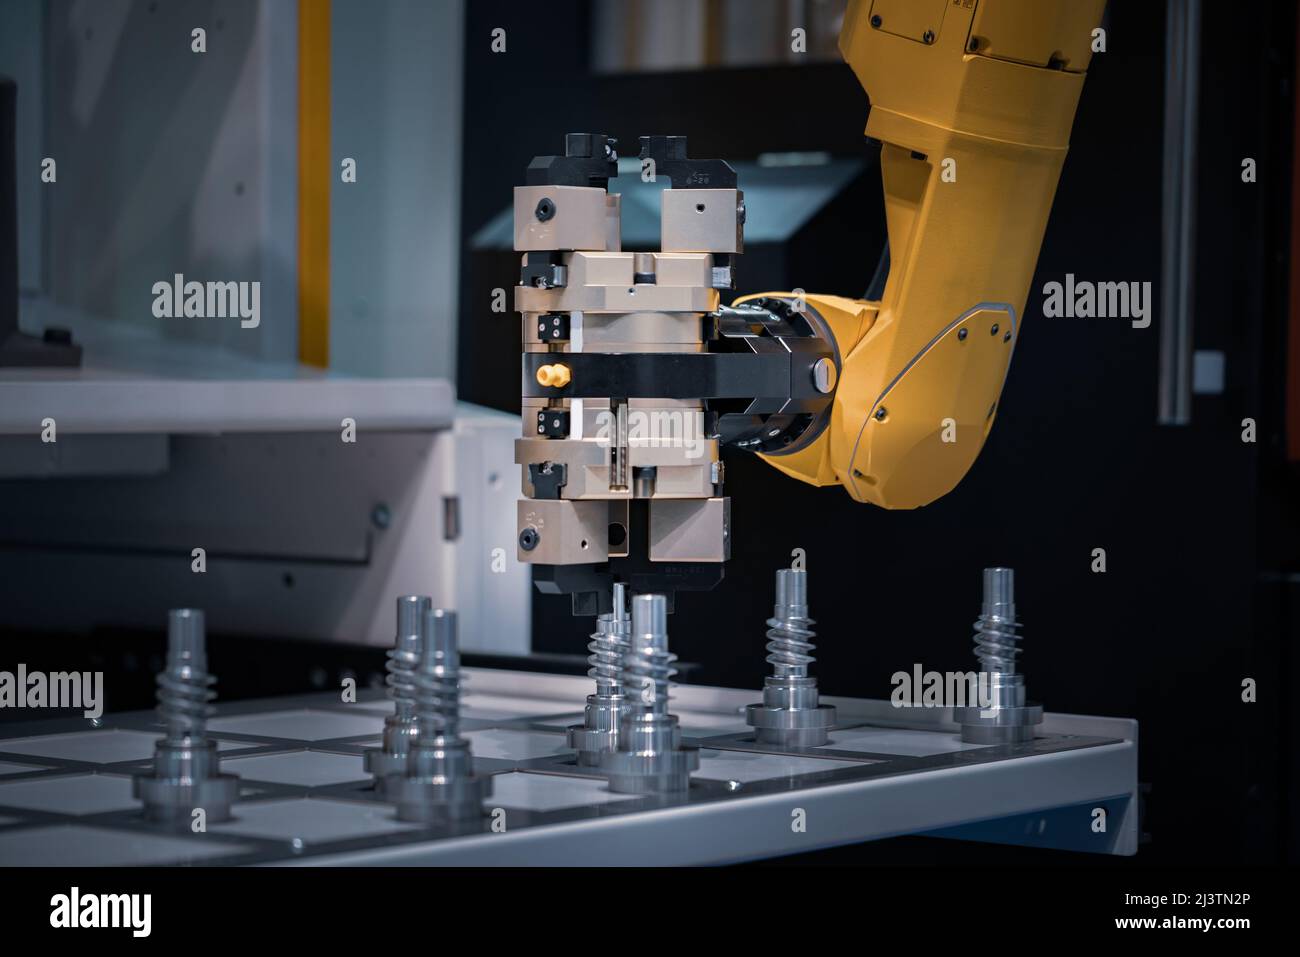 Robotic Arm production lines modern industrial technology. Automated production cell. Stock Photo